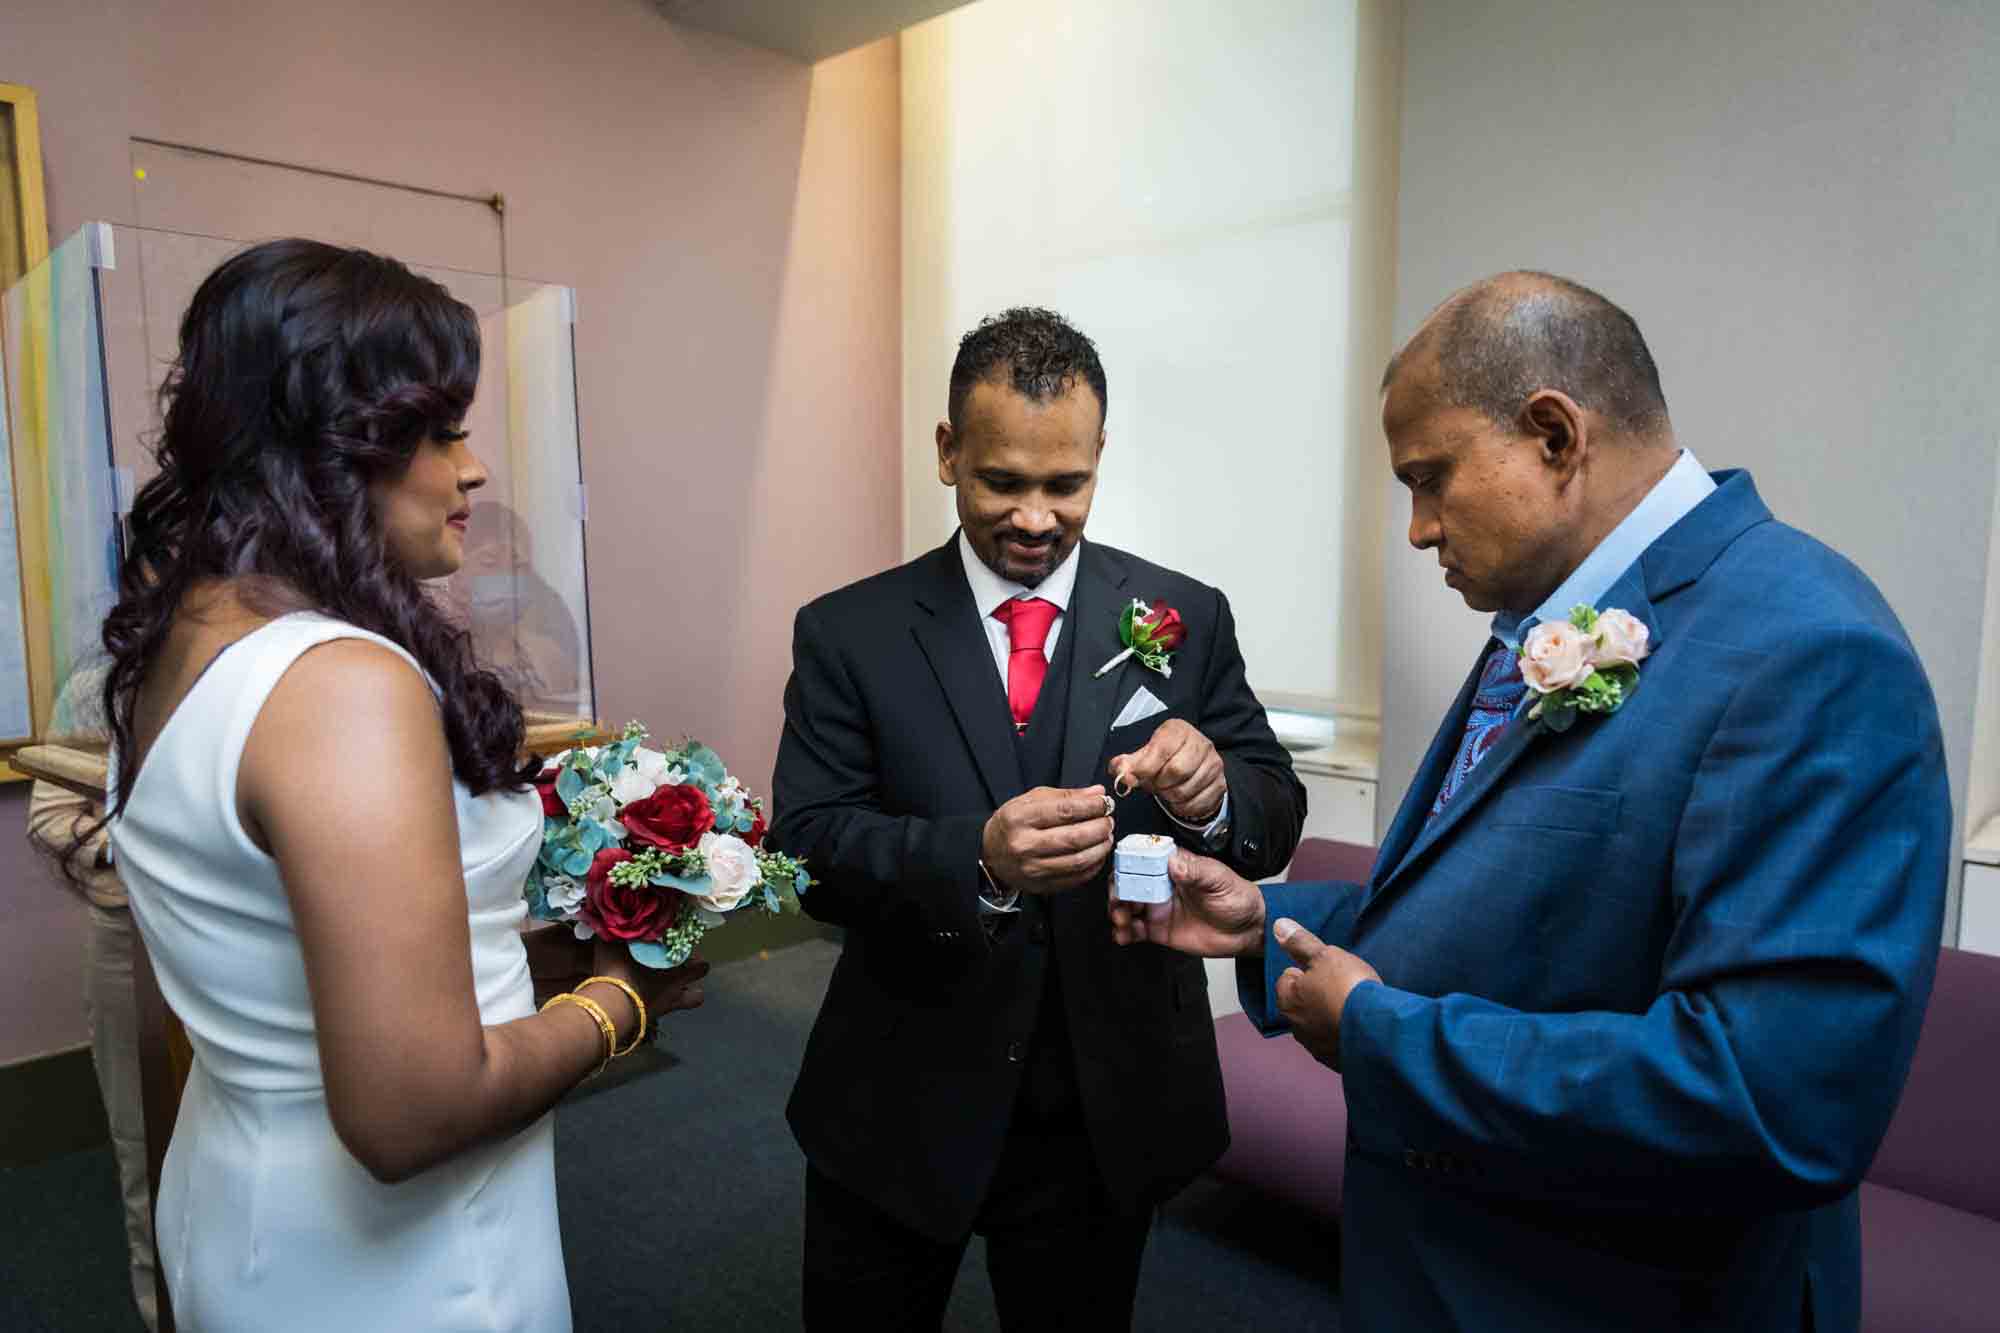 Groom selecting rings out of box in front of bride and older man  at a NYC City Hall wedding